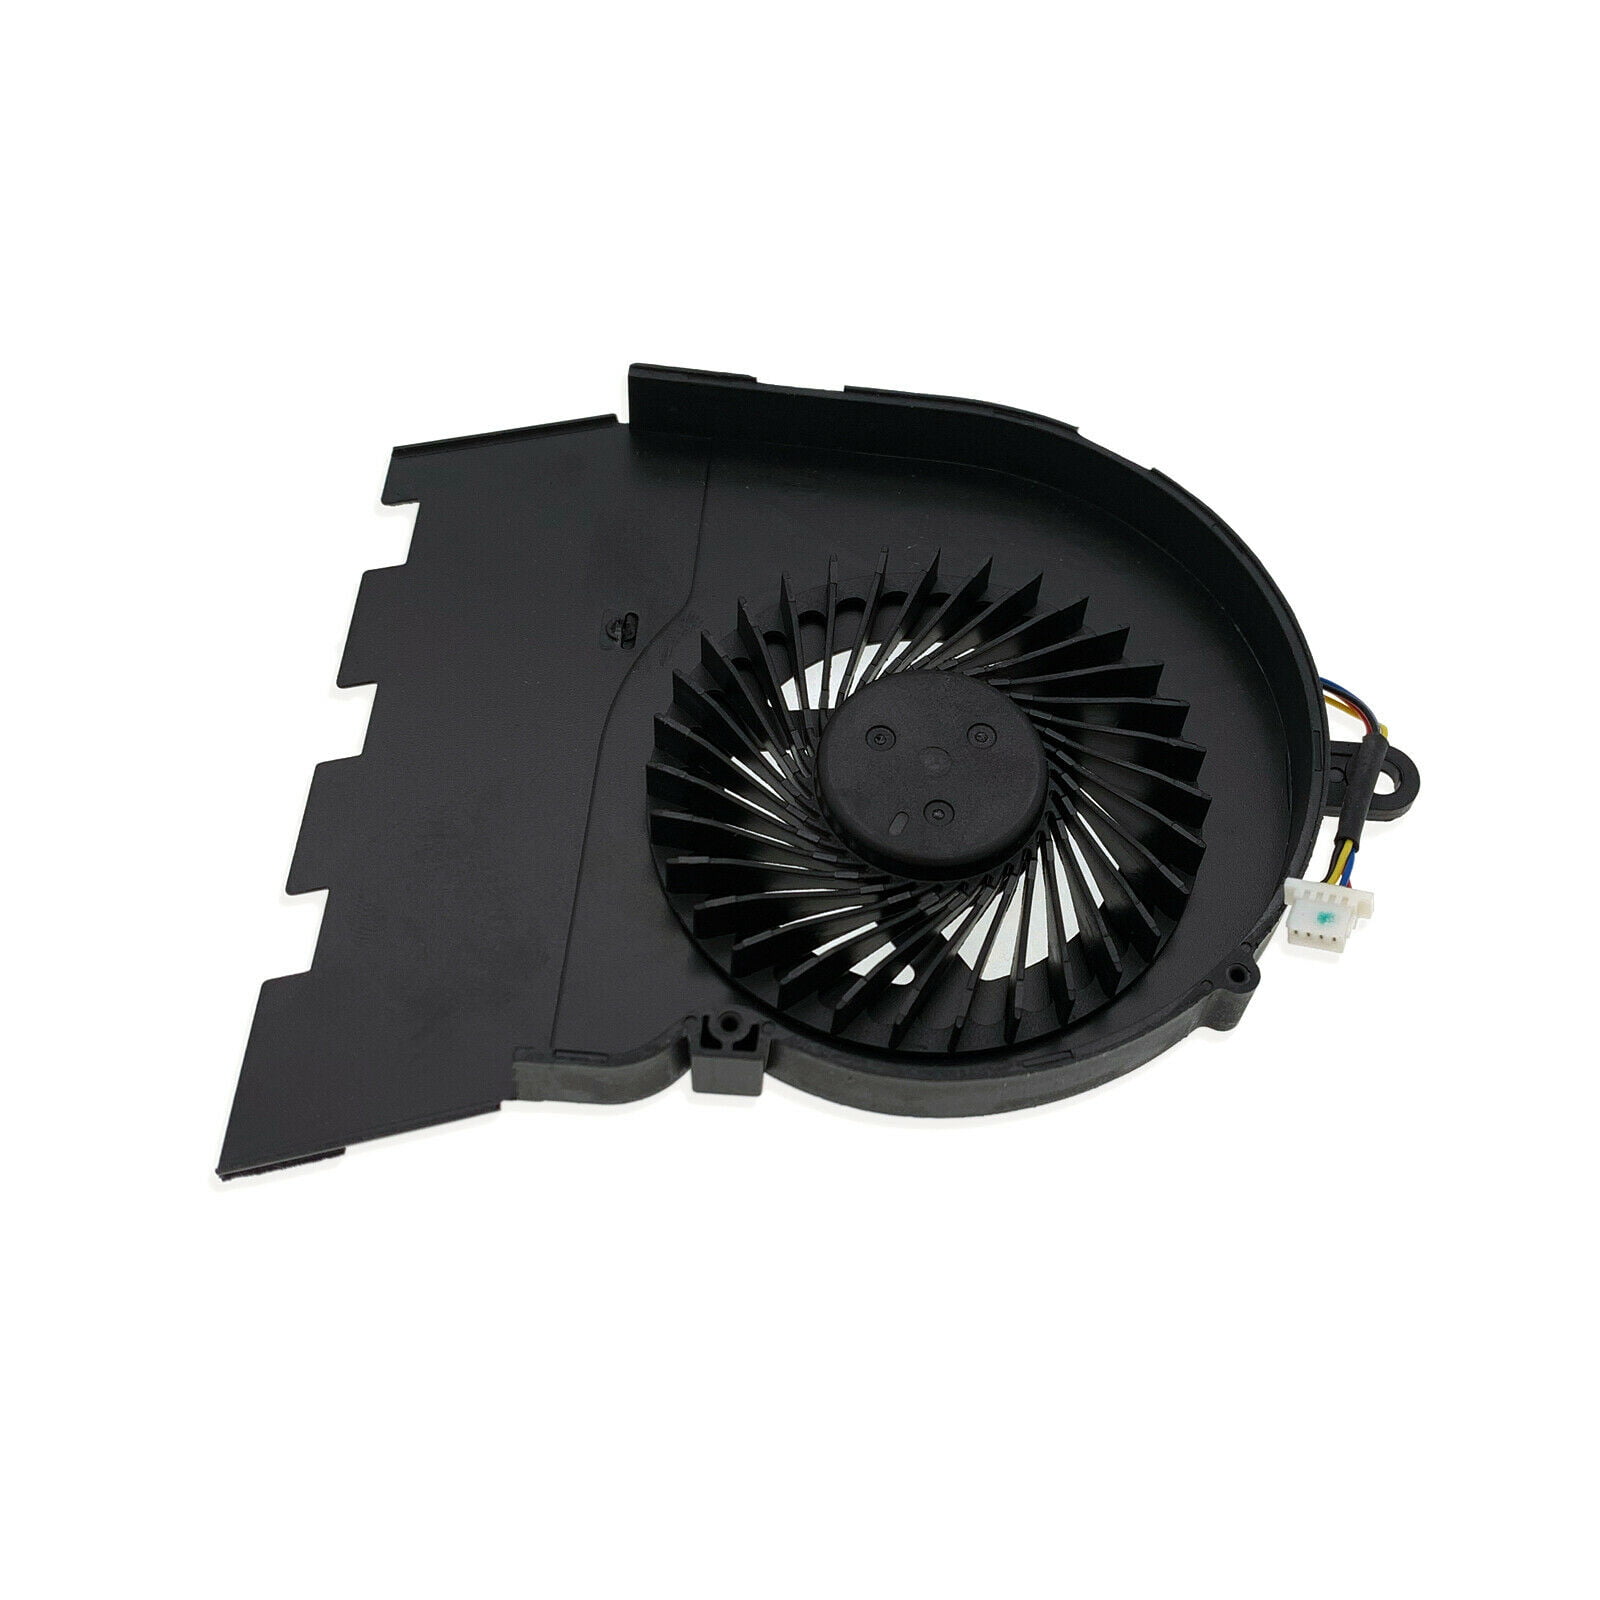 HK-Part Replacement for Dell Inspiron 15-5565 15-5567 17-5767 CPU Cooling Fan DP/N CN-0789DY 4-pins Connector 